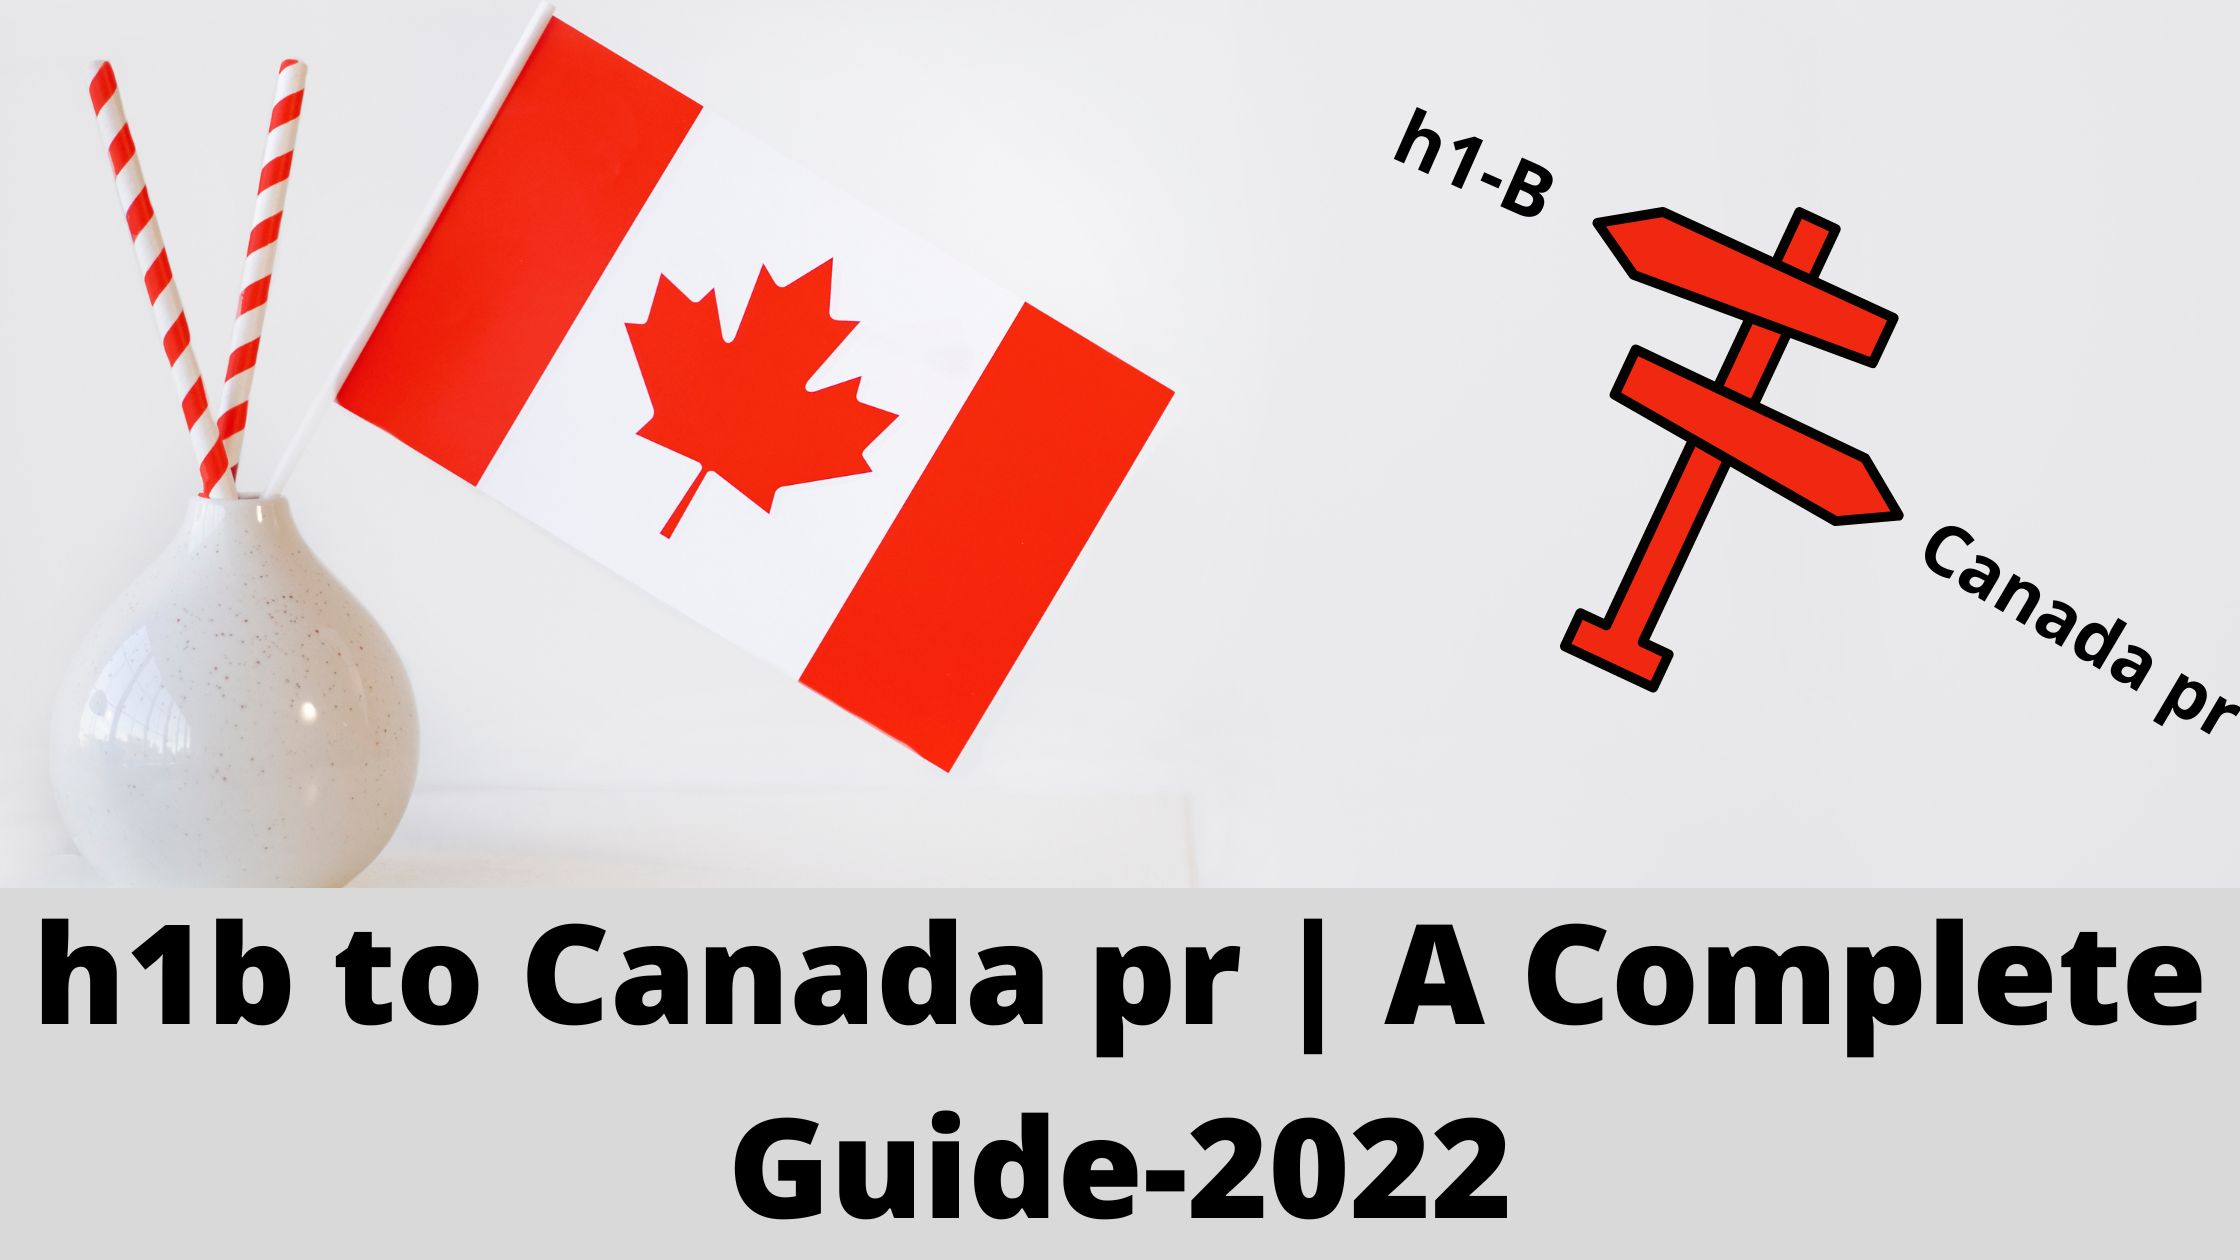 h1b visa travel to canada by car